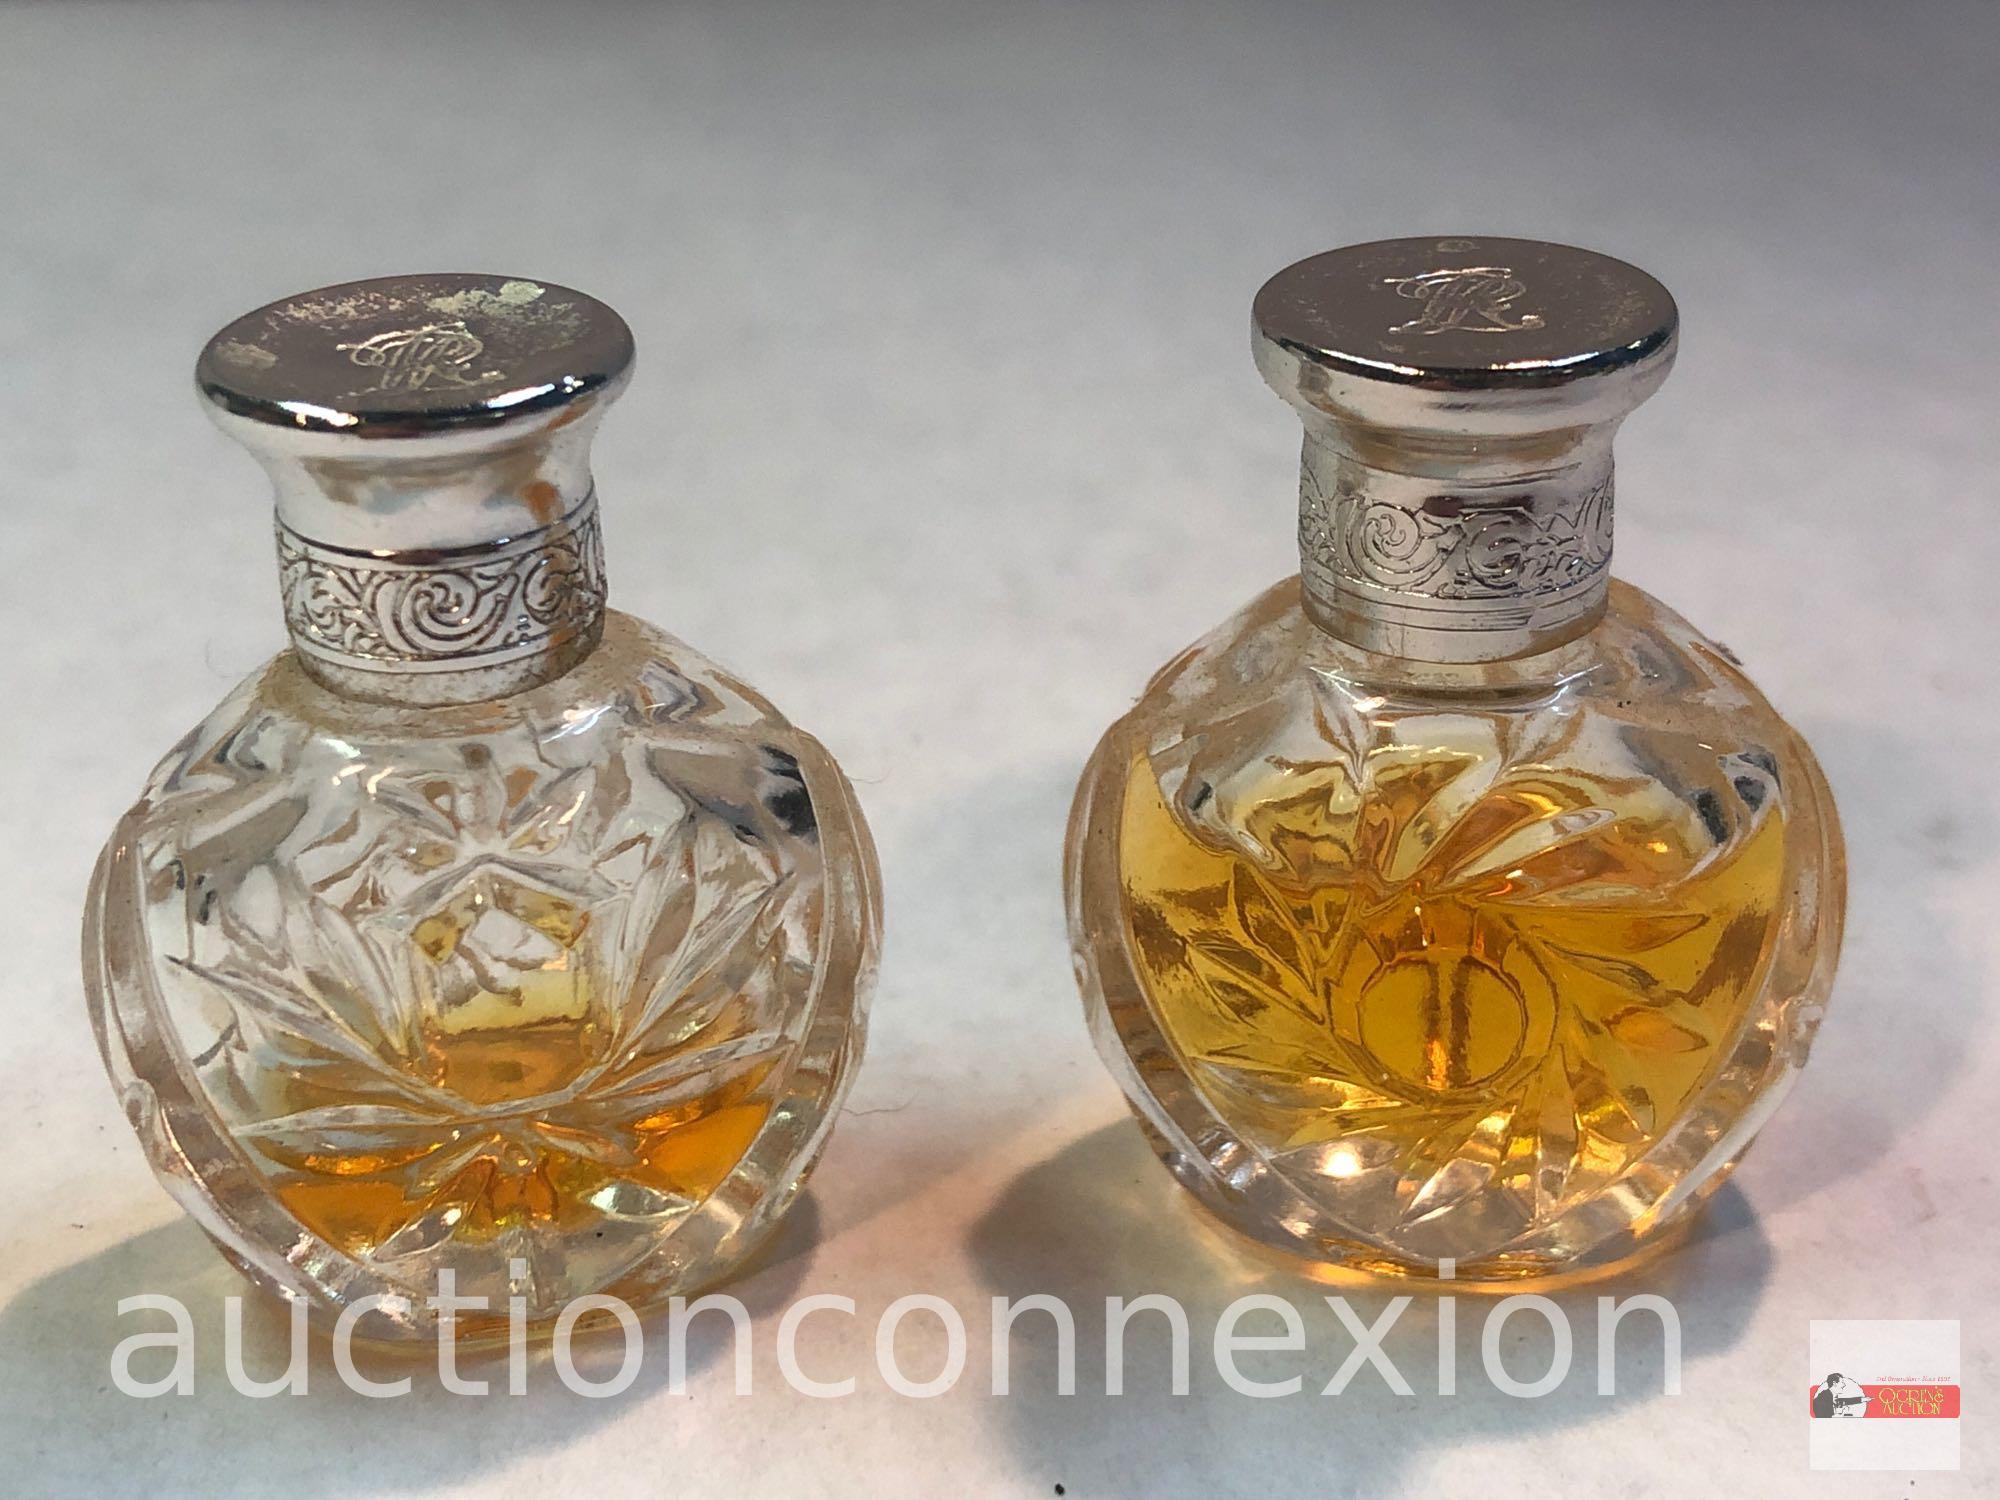 Perfumes - Mini bottles and necklace